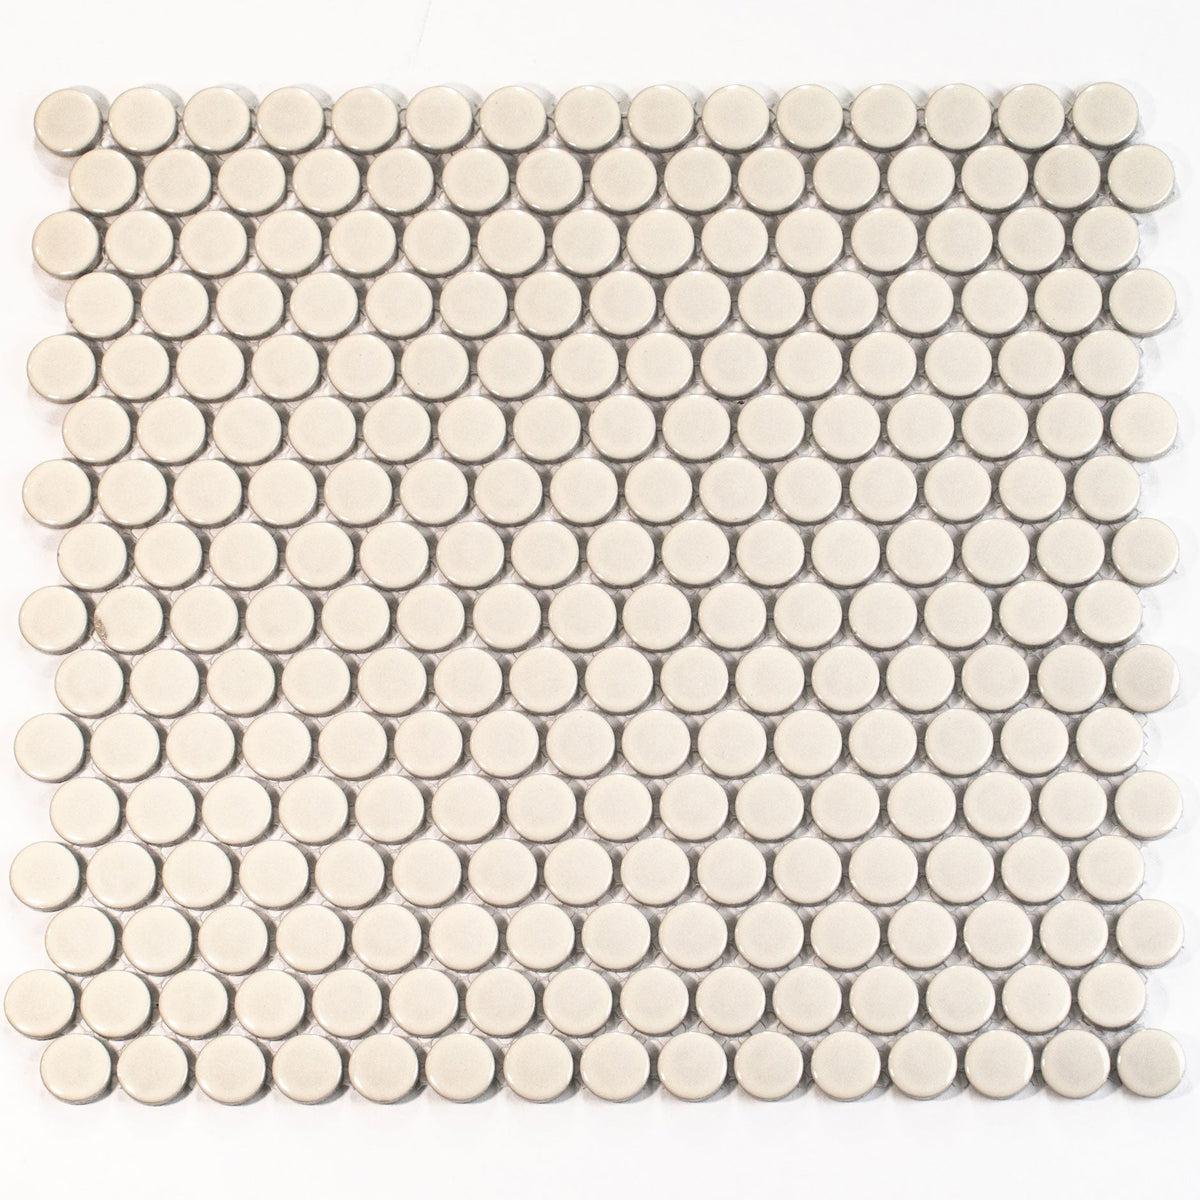 Glossy Cream Buttons Porcelain Penny Round Tile Sample